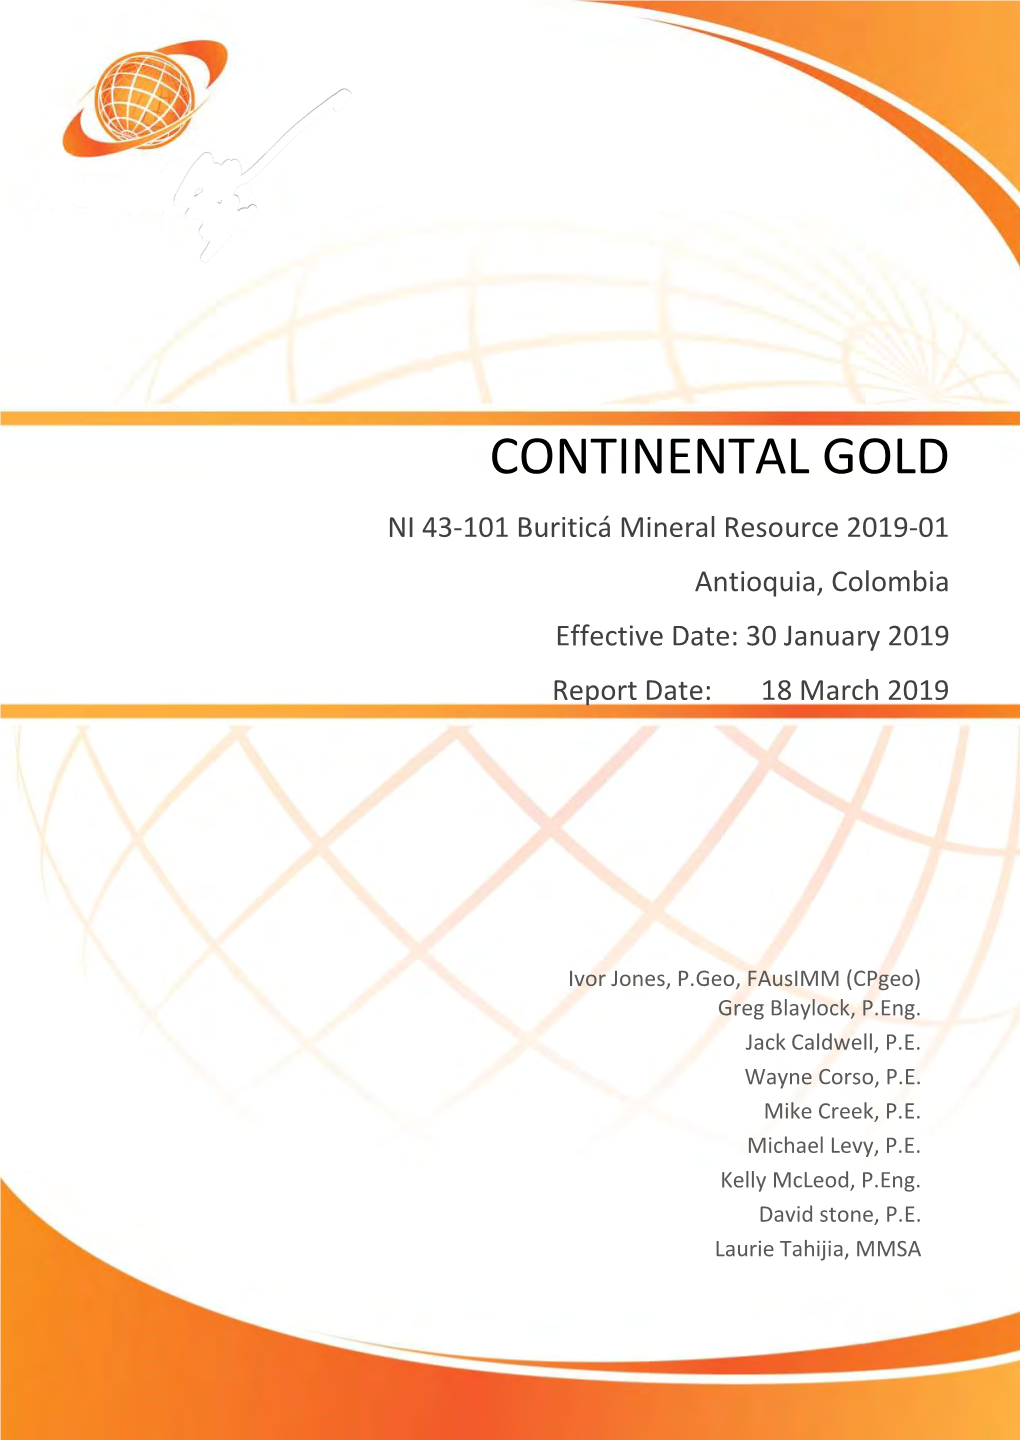 NI 43-101 Buriticá Mineral Resource 2019-01 Antioquia, Colombia Effective Date: 30 January 2019 Report Date: 18 March 2019